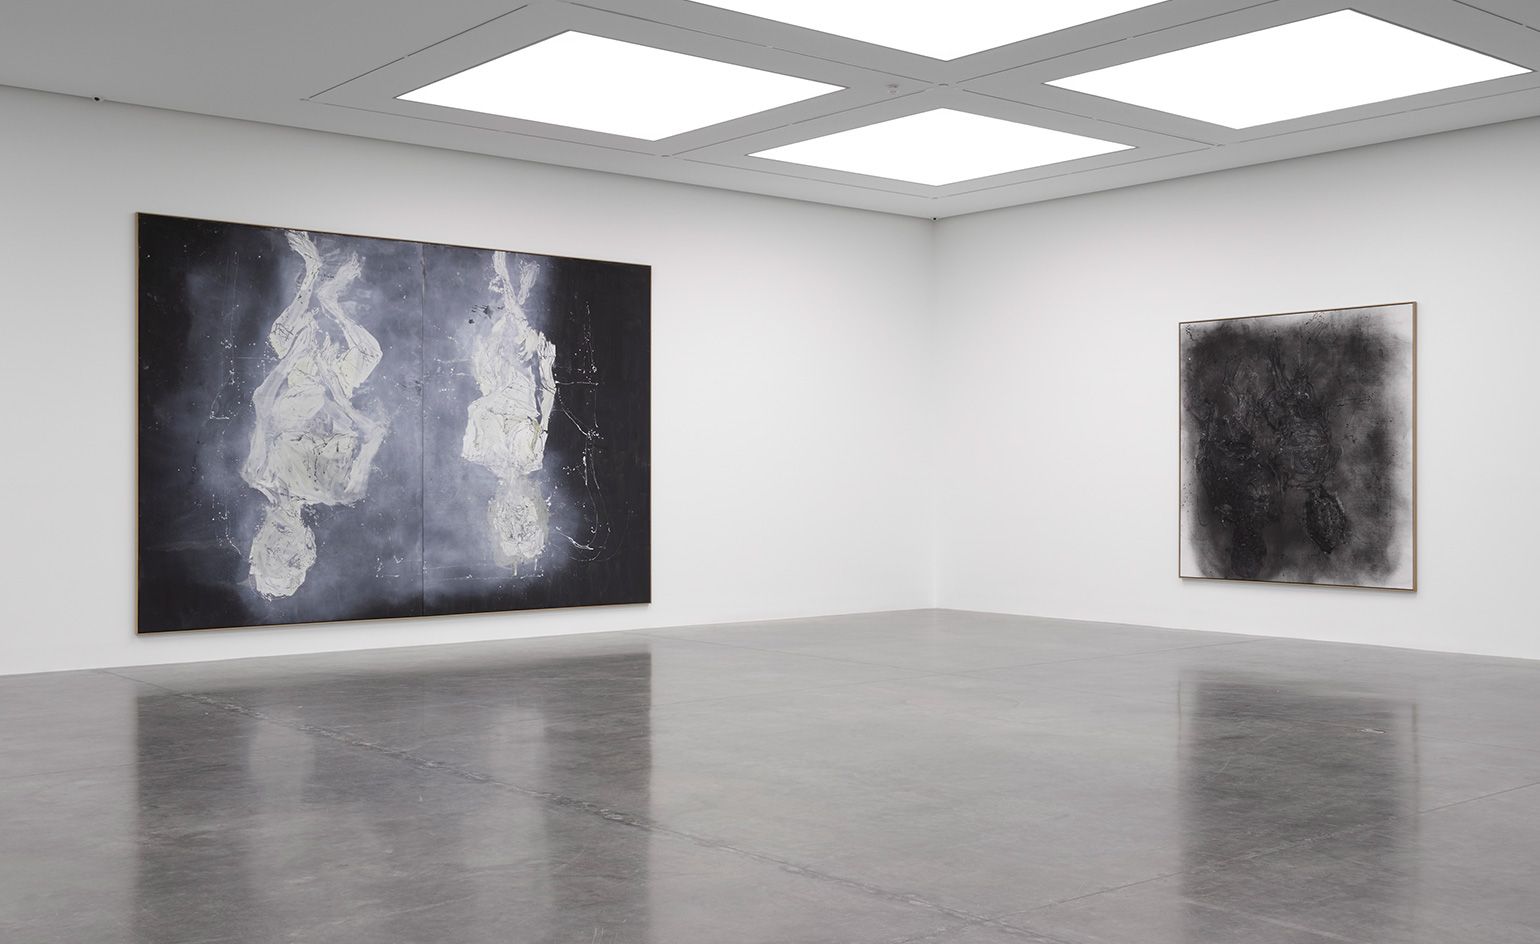 Georg Baselitz presents new oil paintings at White Cube | Wallpaper